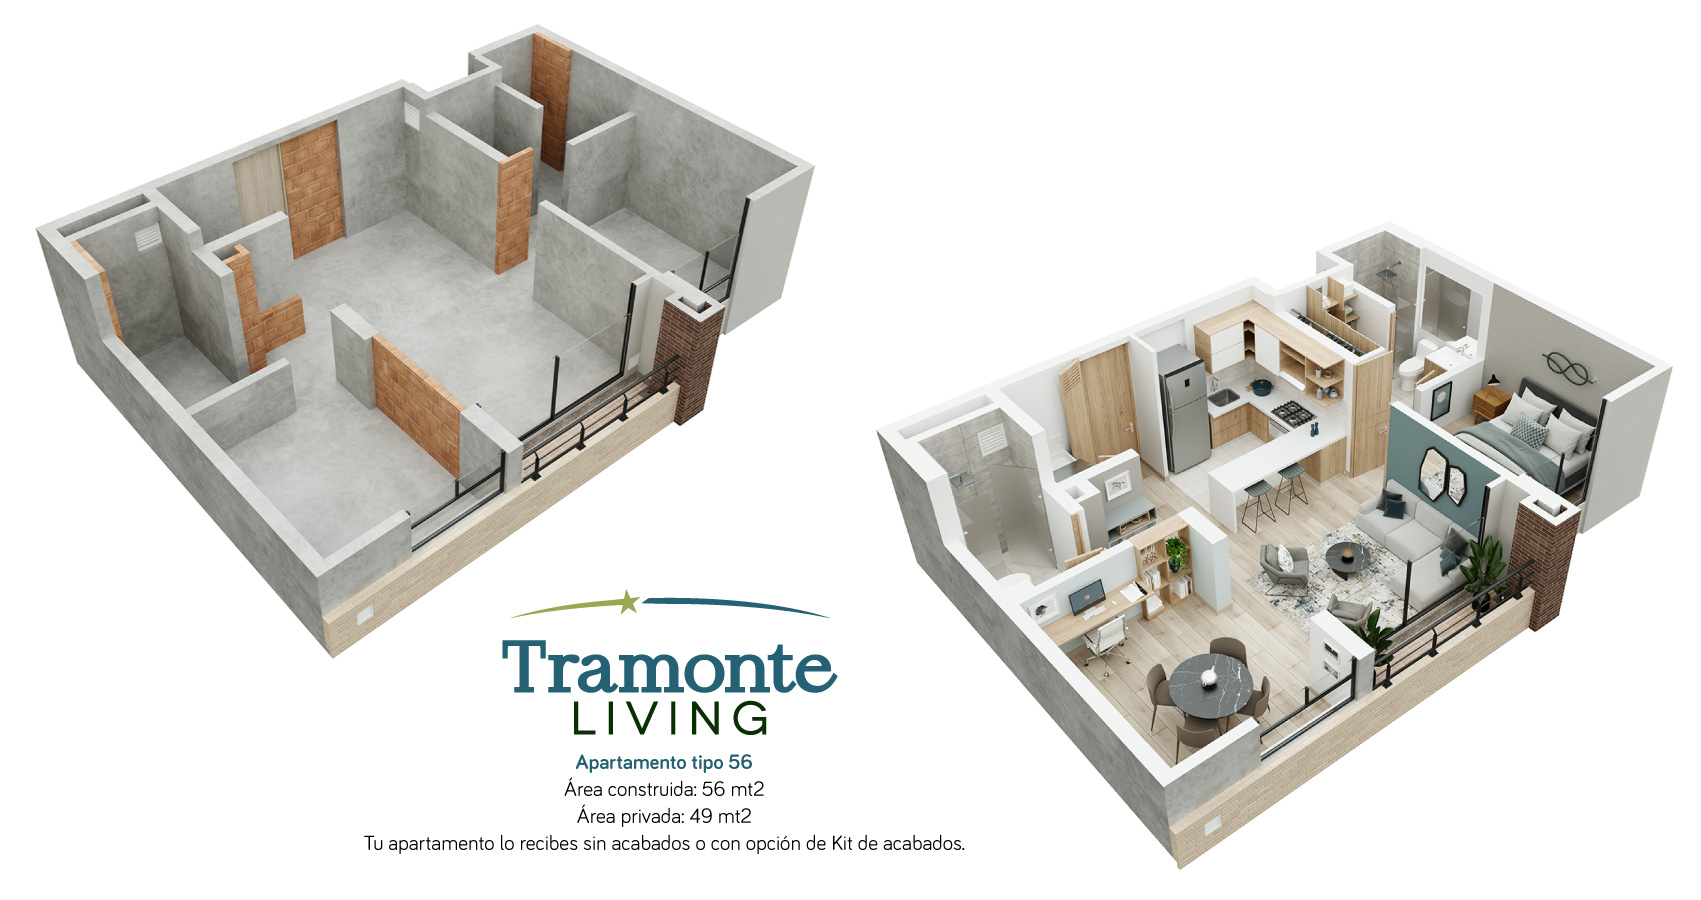 tramonte living tipo 56 